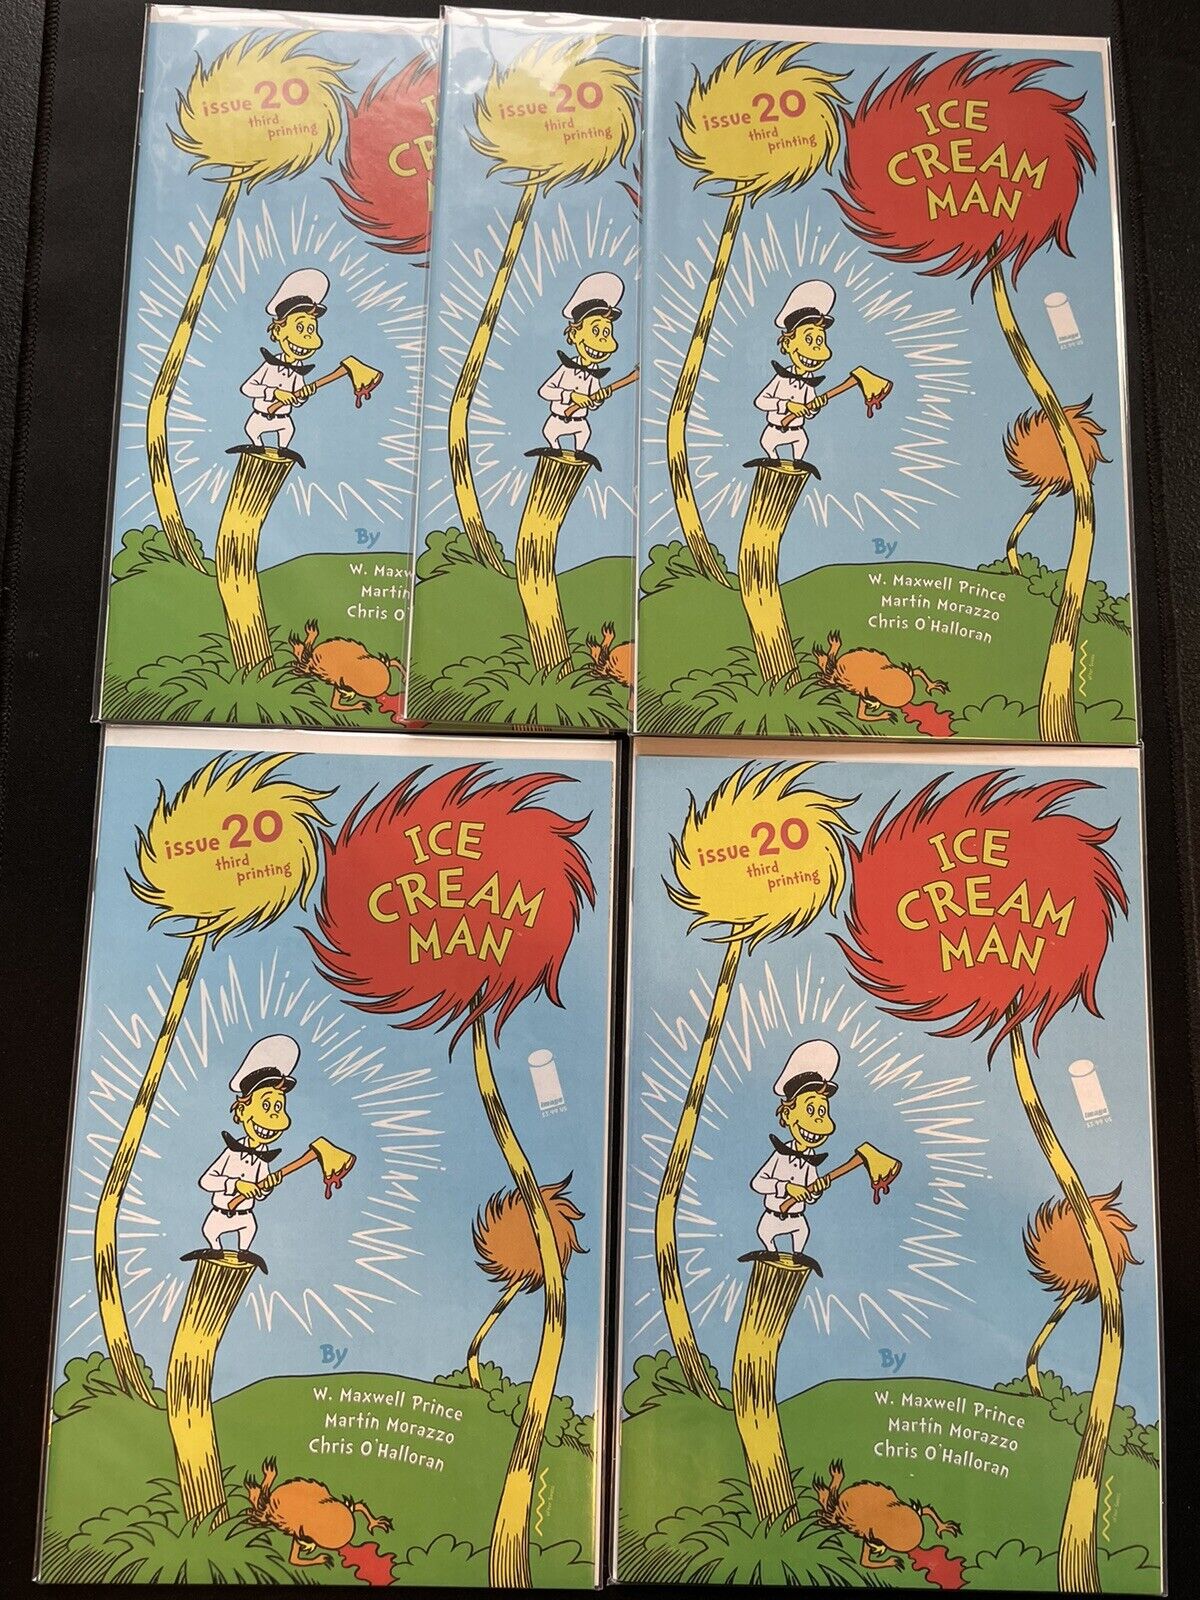 Ice Cream Man #20 - 3rd PRINT- DR. SUESS HOMAGE Lot Of 5 Copies NM- Or Better